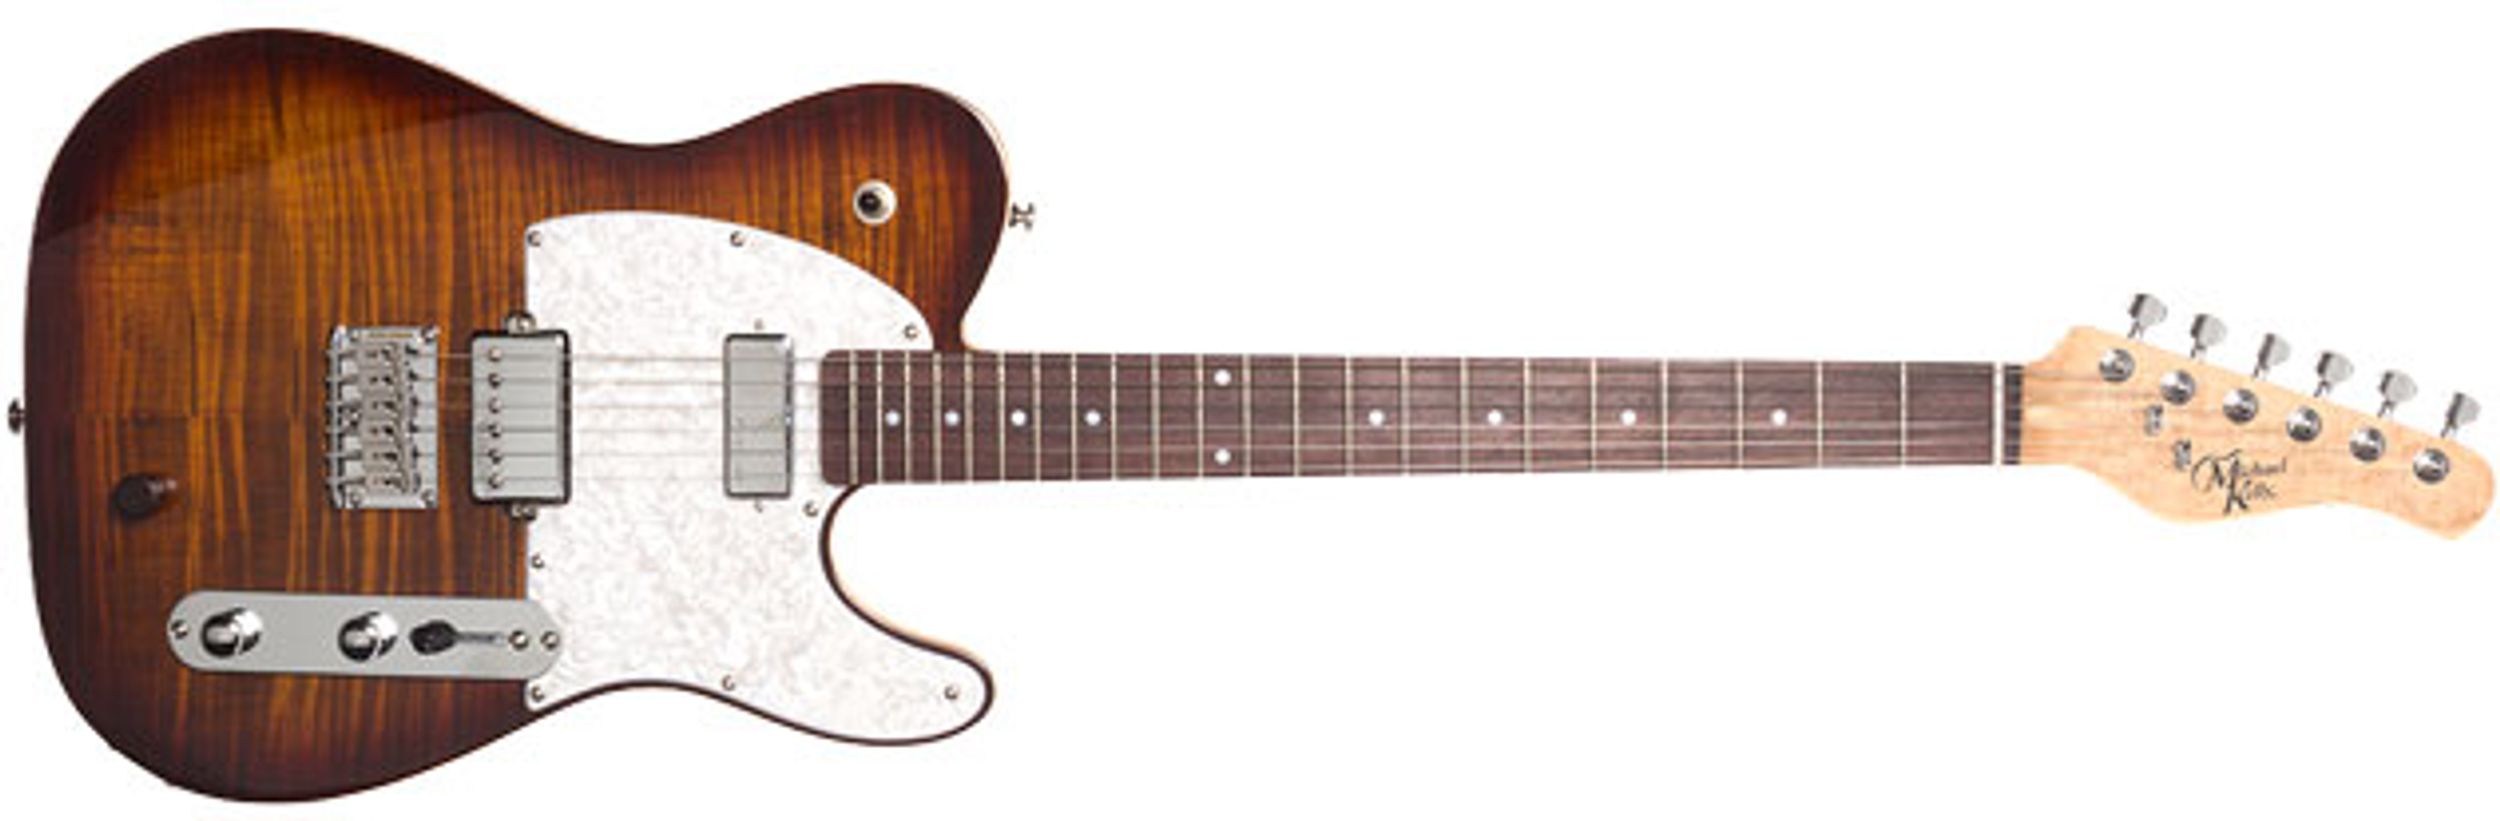 Michael Kelly Guitars Introduces the Hybrid 55